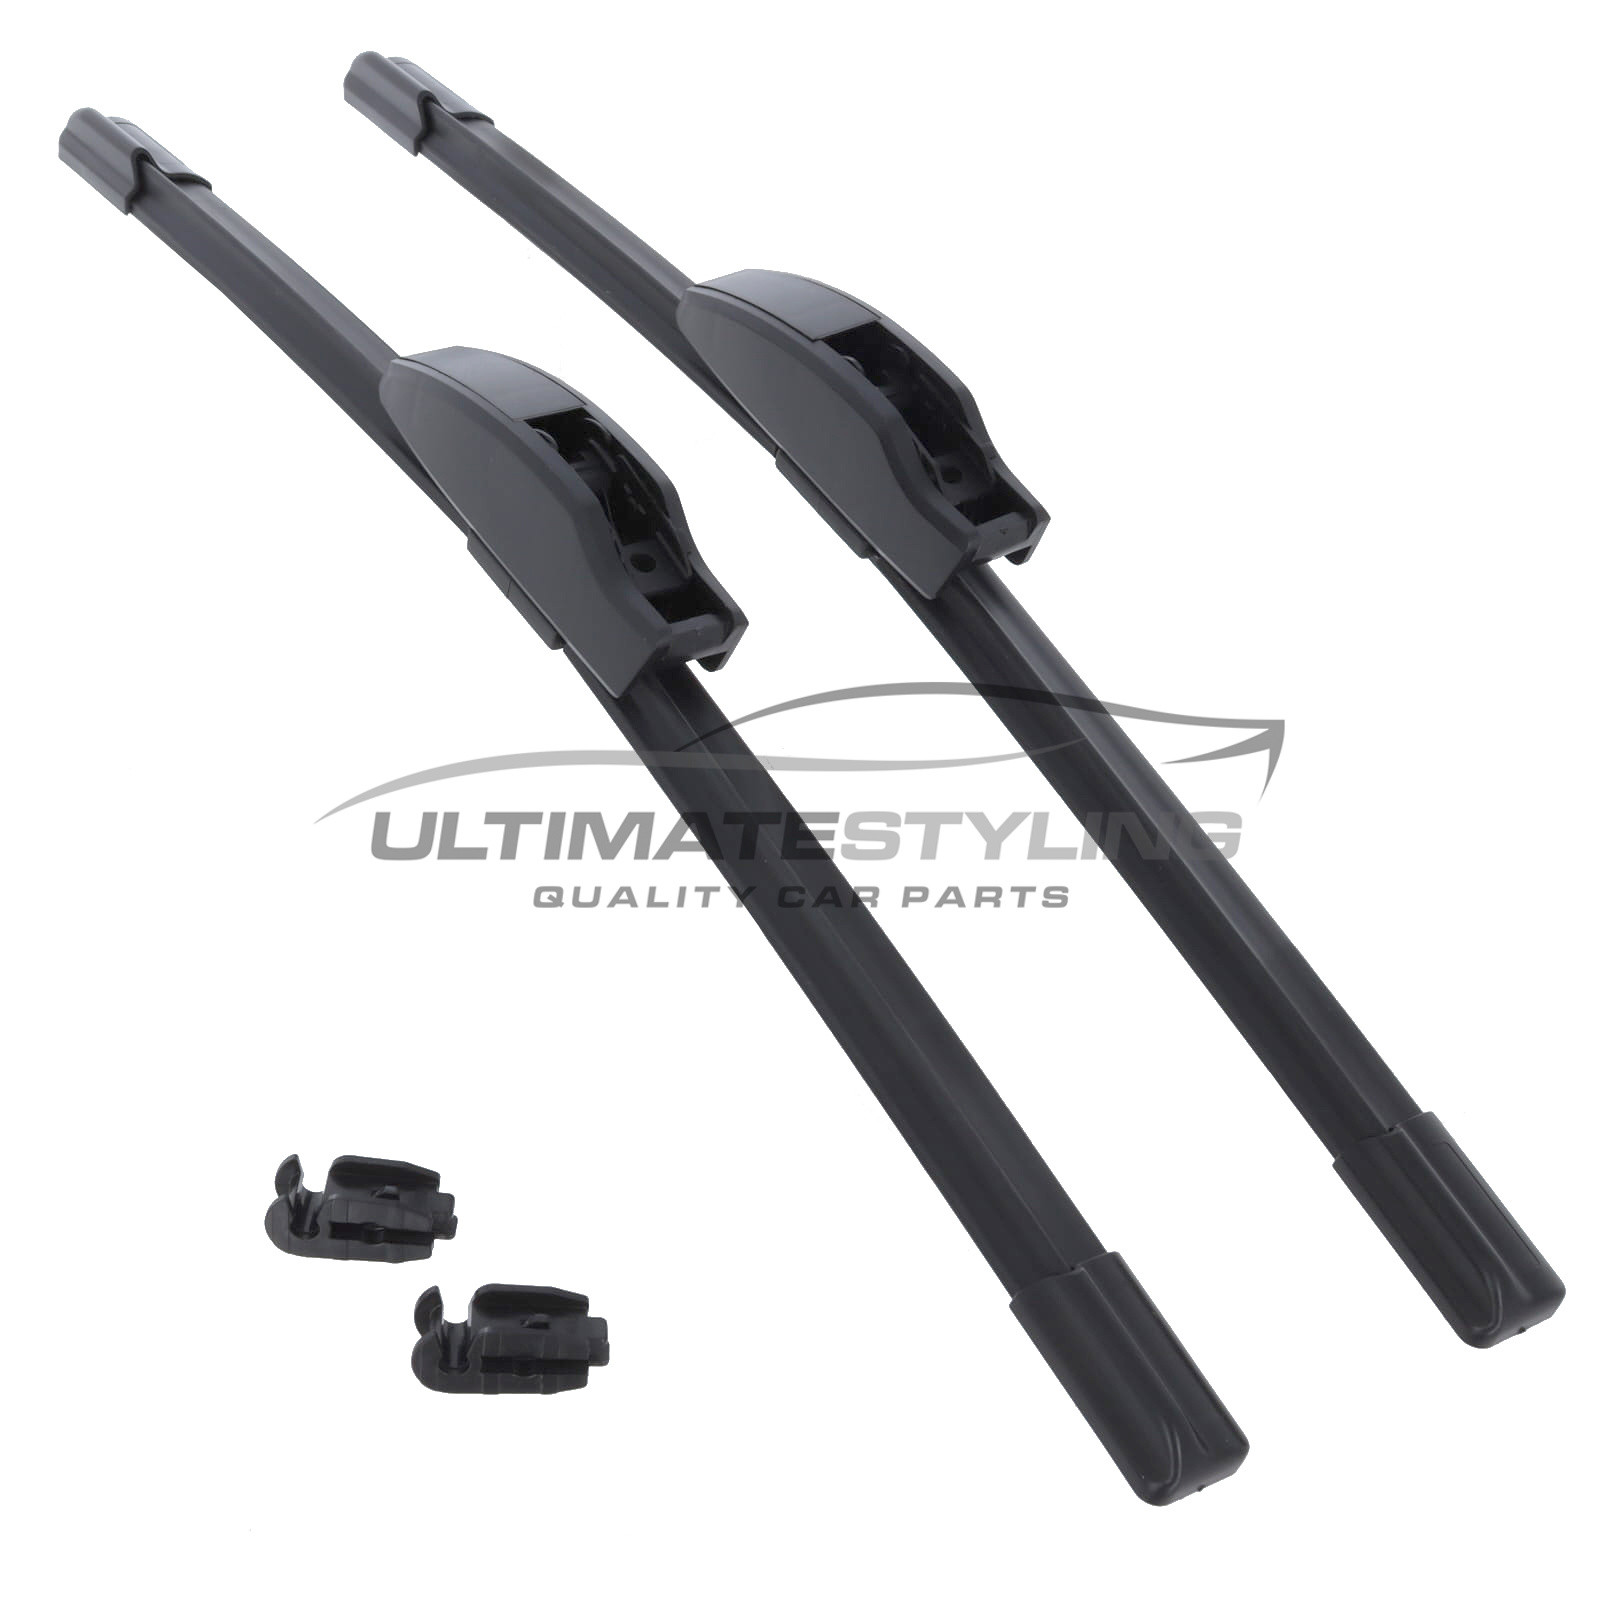 Drivers Side & Passenger Side (Front) Wiper Blades for Rover Allegro